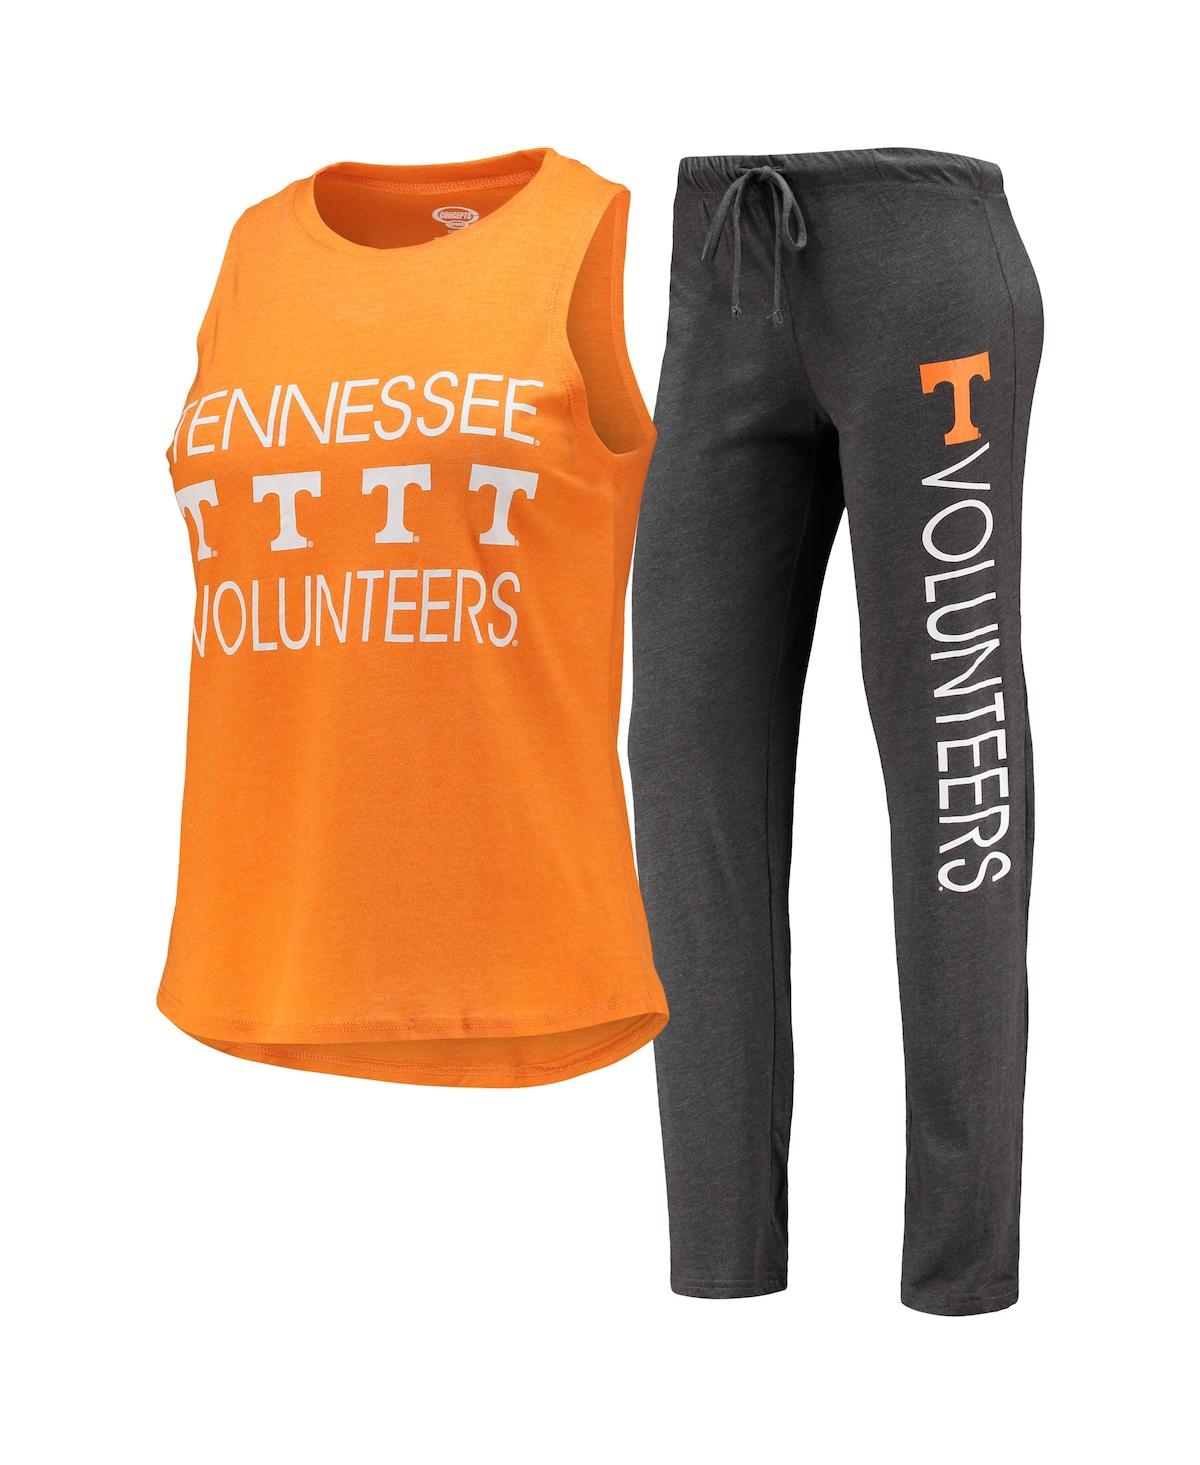 Women's Concepts Sport Charcoal, Tennessee Orange Tennessee Volunteers Tank Top and Pants Sleep Set - Charcoal, Tennessee Orange